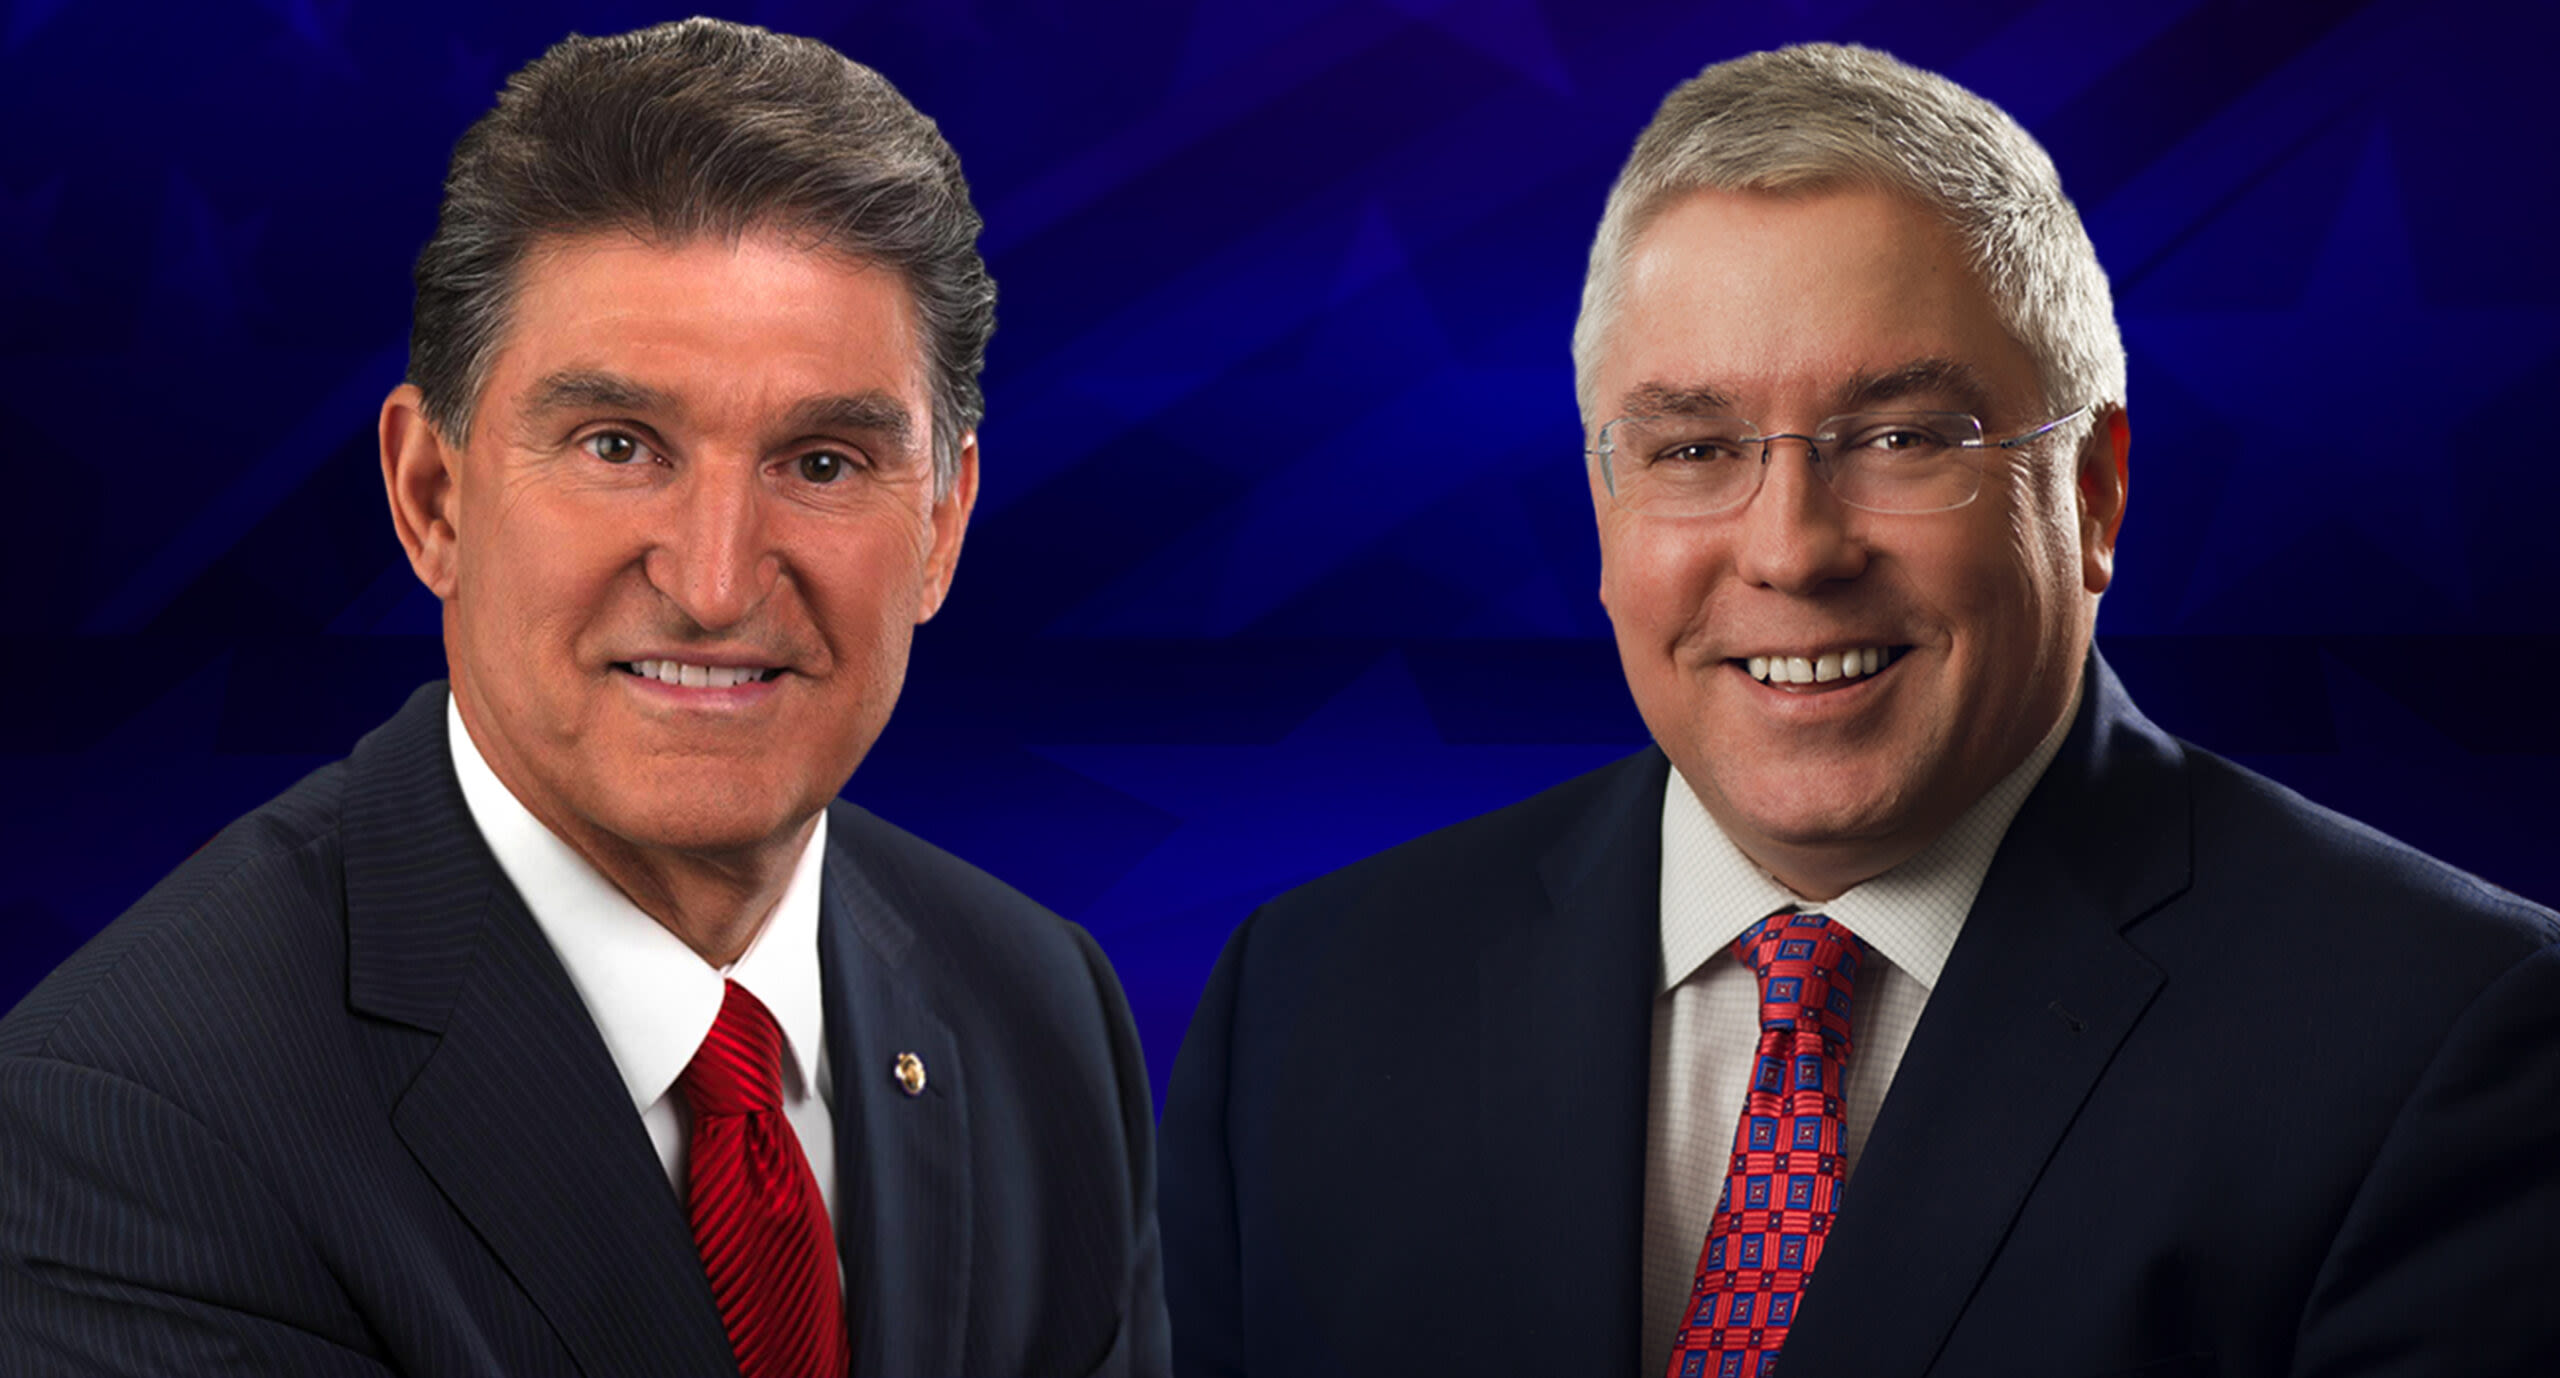 Sources: Manchin is being encouraged to hop into governor's race against Morrisey - WV MetroNews